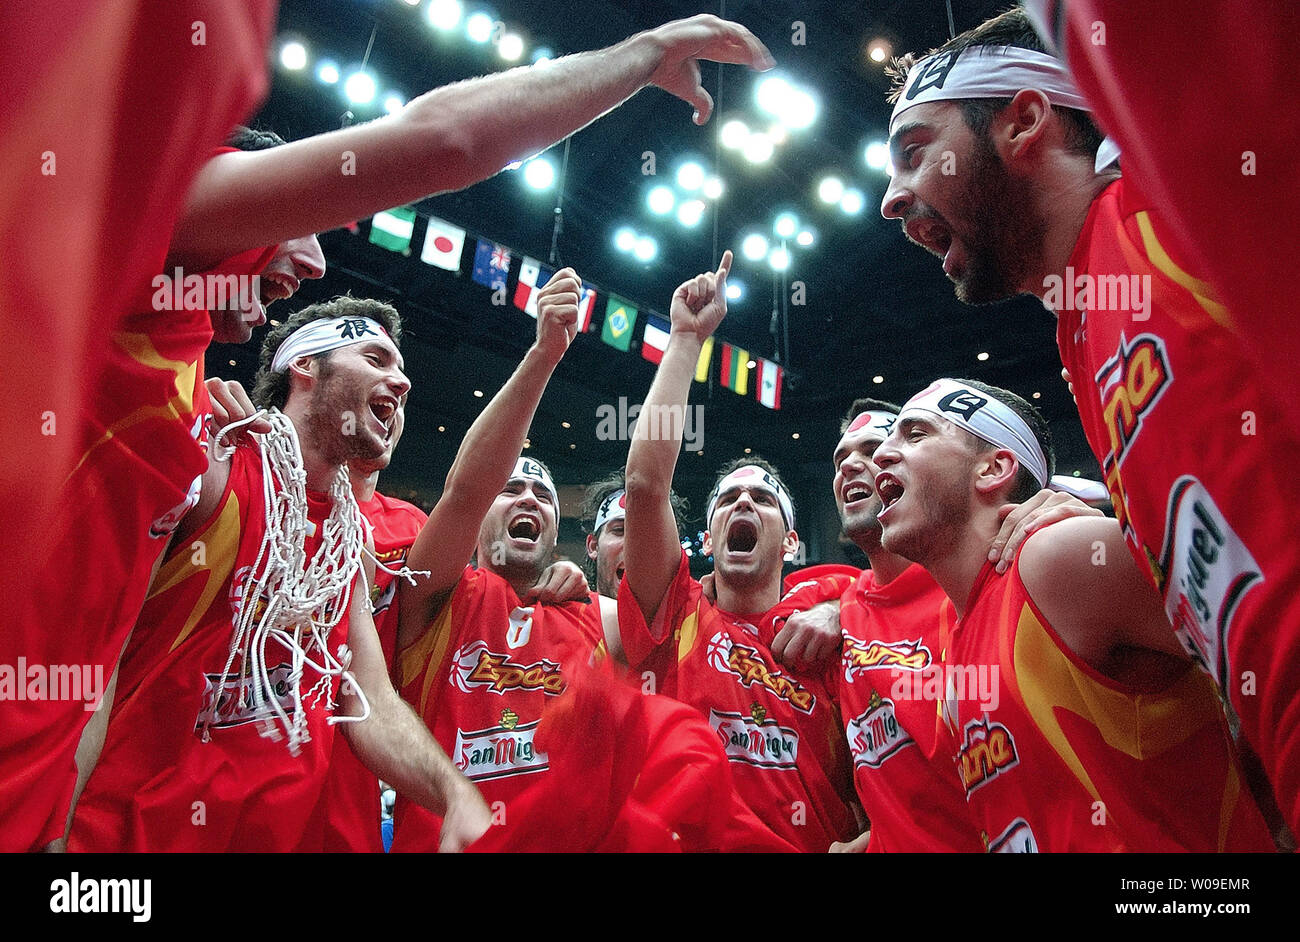 Spanish players celebrate their gold medal victory in the finals defeating Greece 70-47 at the FIBA World Basketball Championship, in Saitama, Japan on September 3, 2006.  (UPI Photo/Keizo Mori) Stock Photo